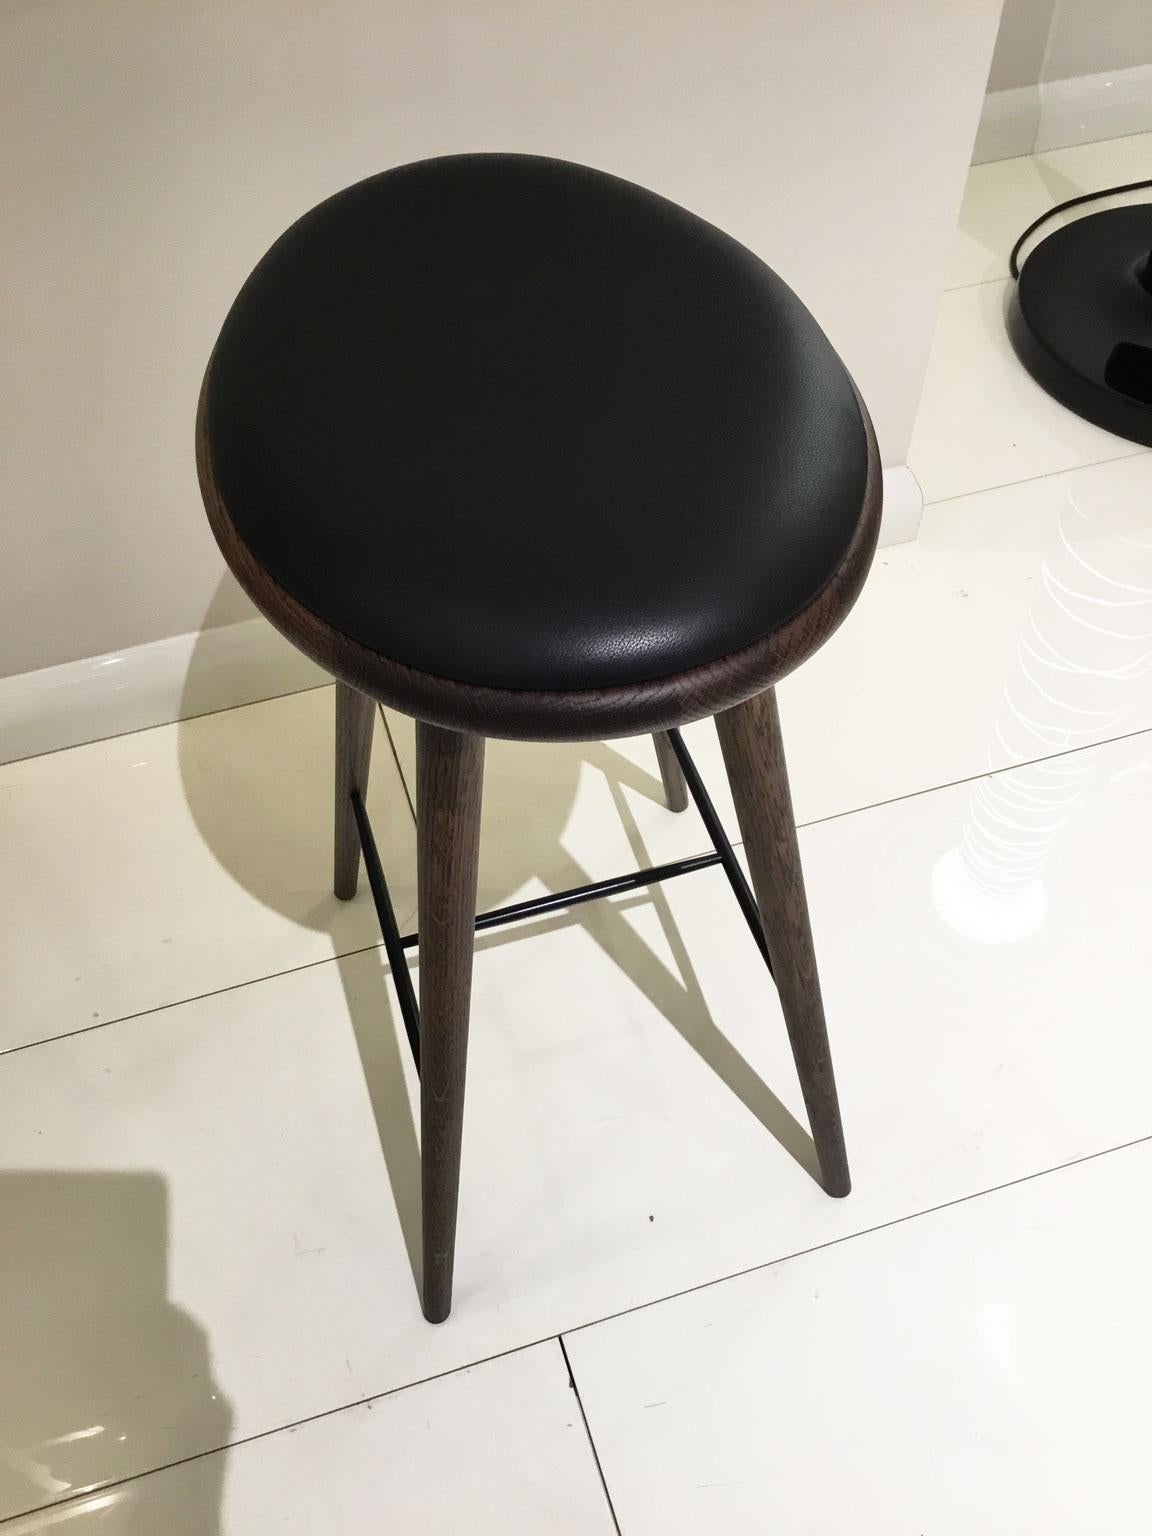 European Wood Bar Stool in Dark Stained Oak with Black Leather Seat